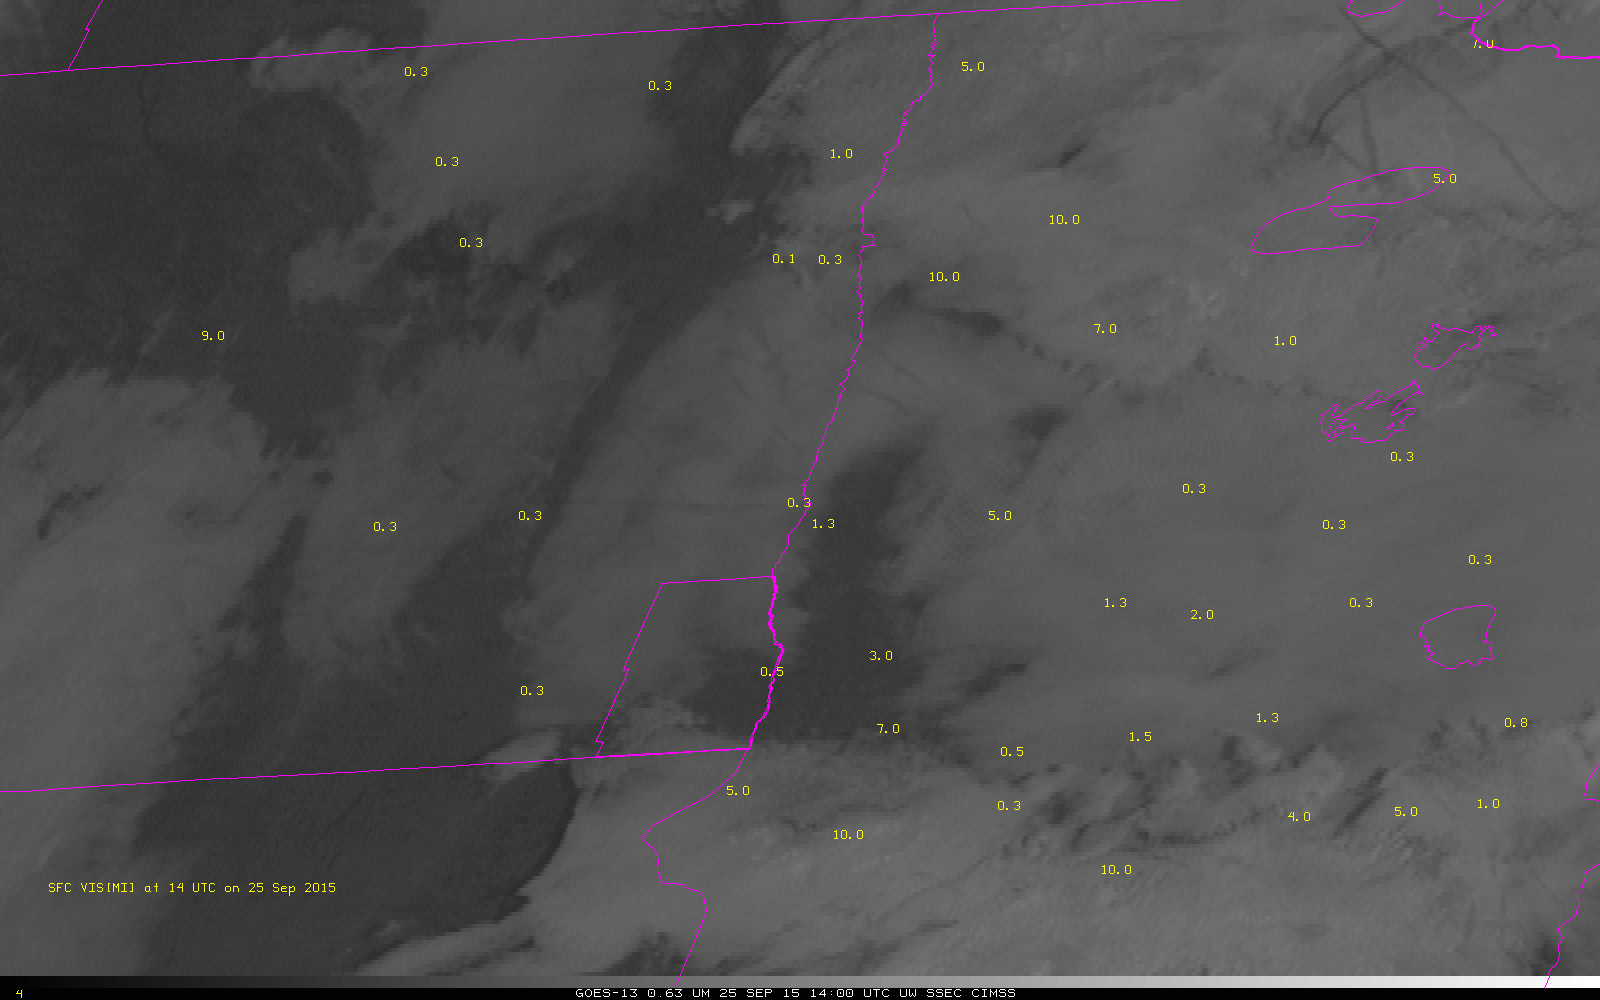 GOES-13 Visible (0.63 µm) imagery and surface observations of visibility; Richland County is outlined [click to play animation]